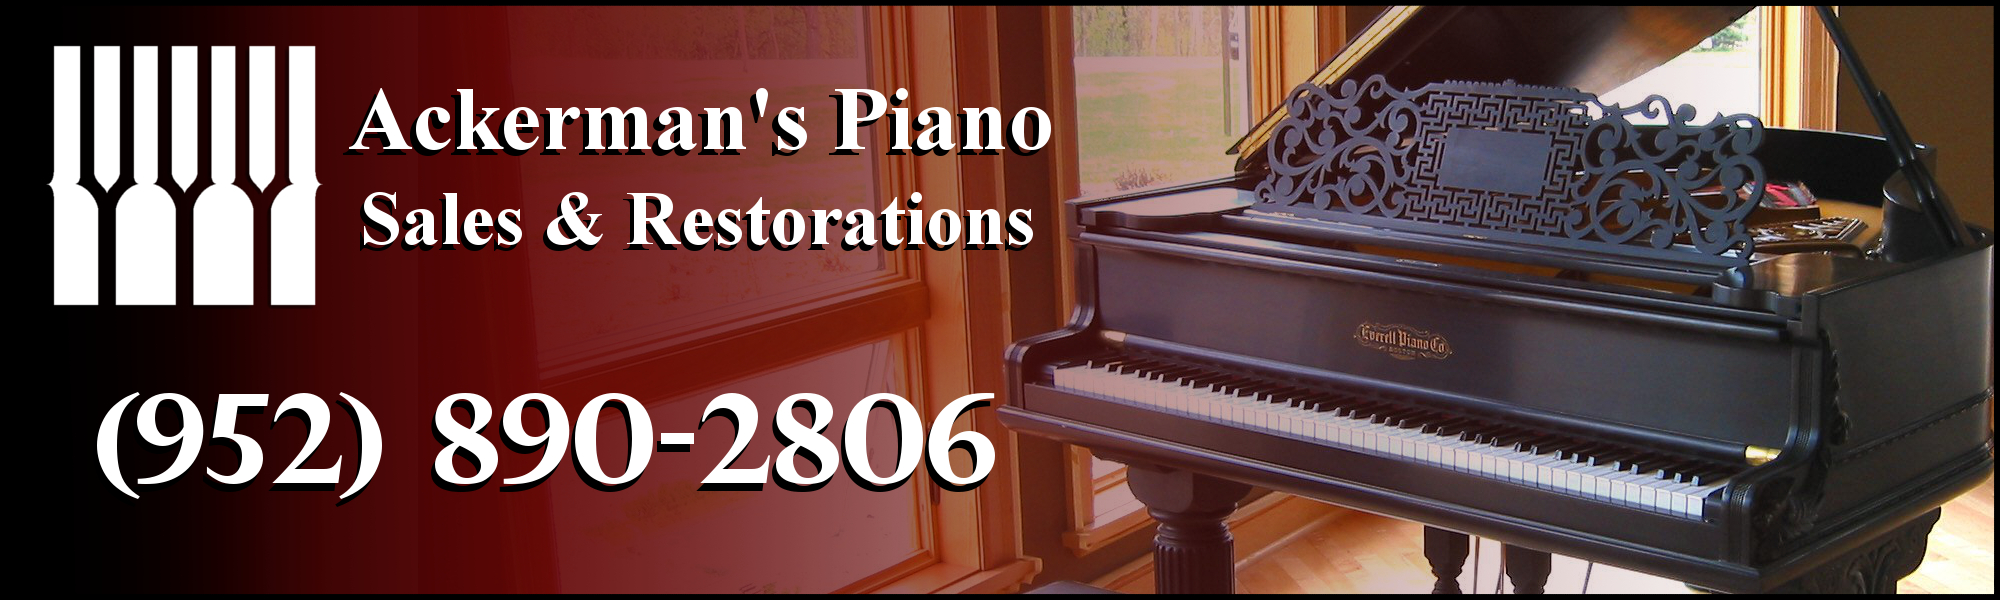 Ackerman's Piano sales and Restorations  Showroom page  952-890-2806